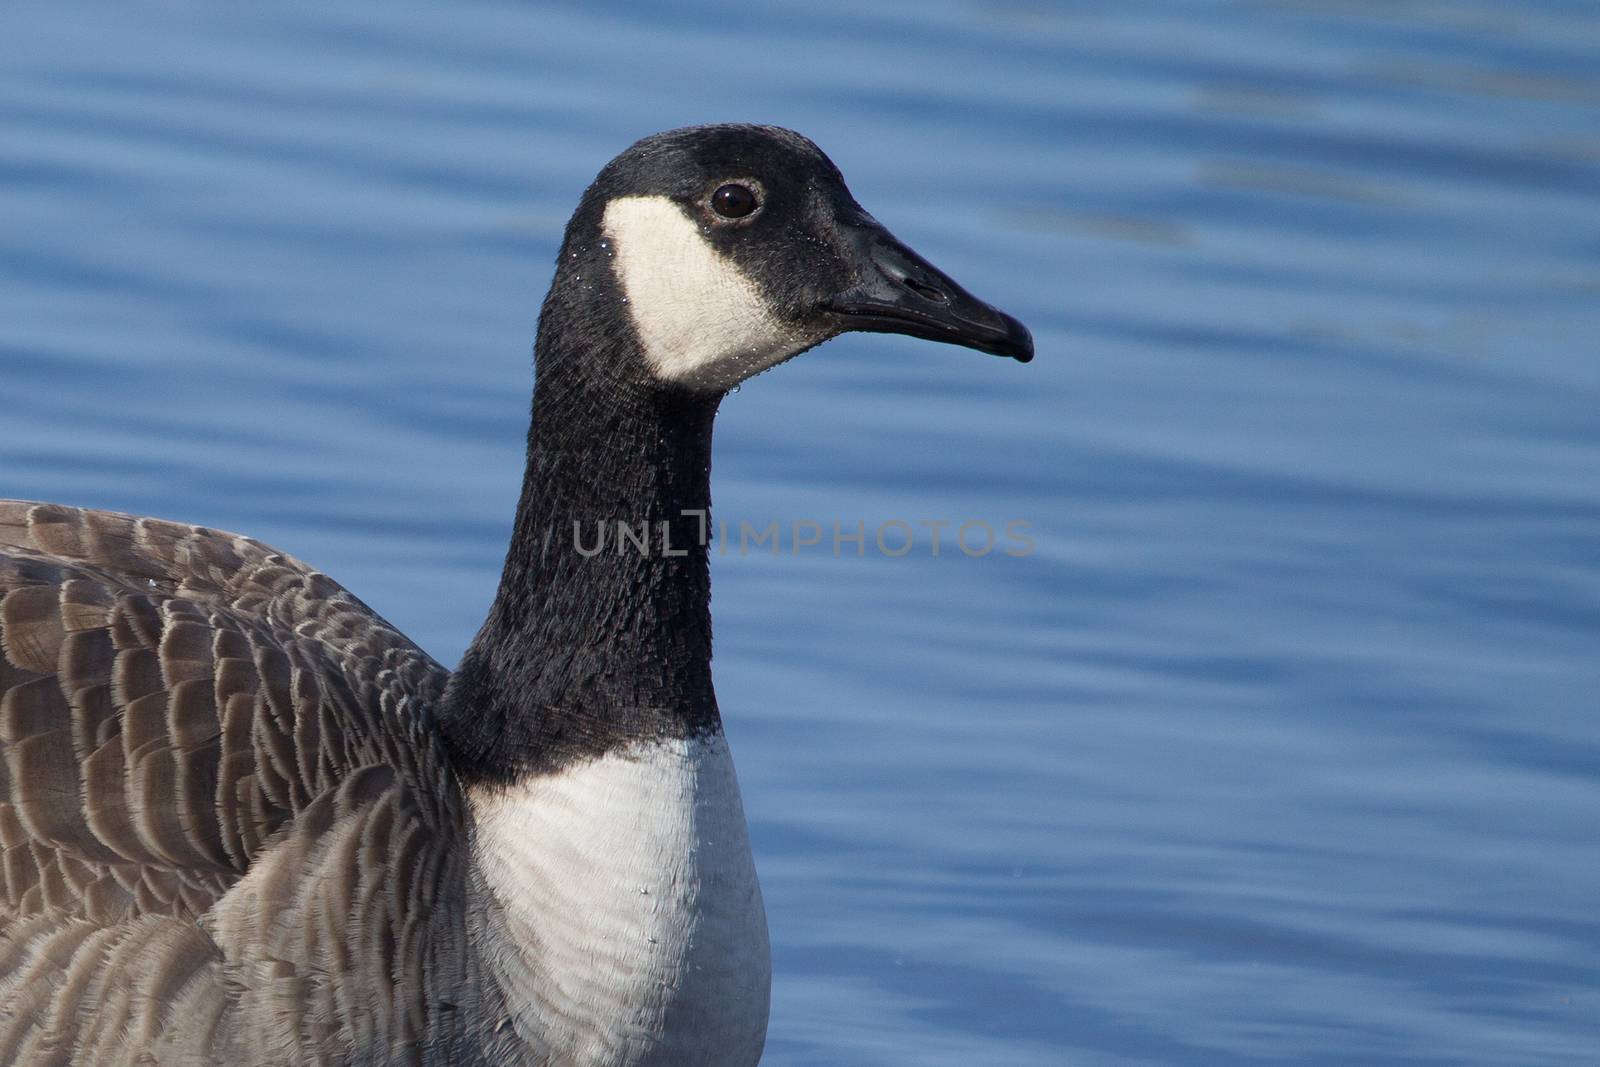 Canadian Goose swimming by Coffee999